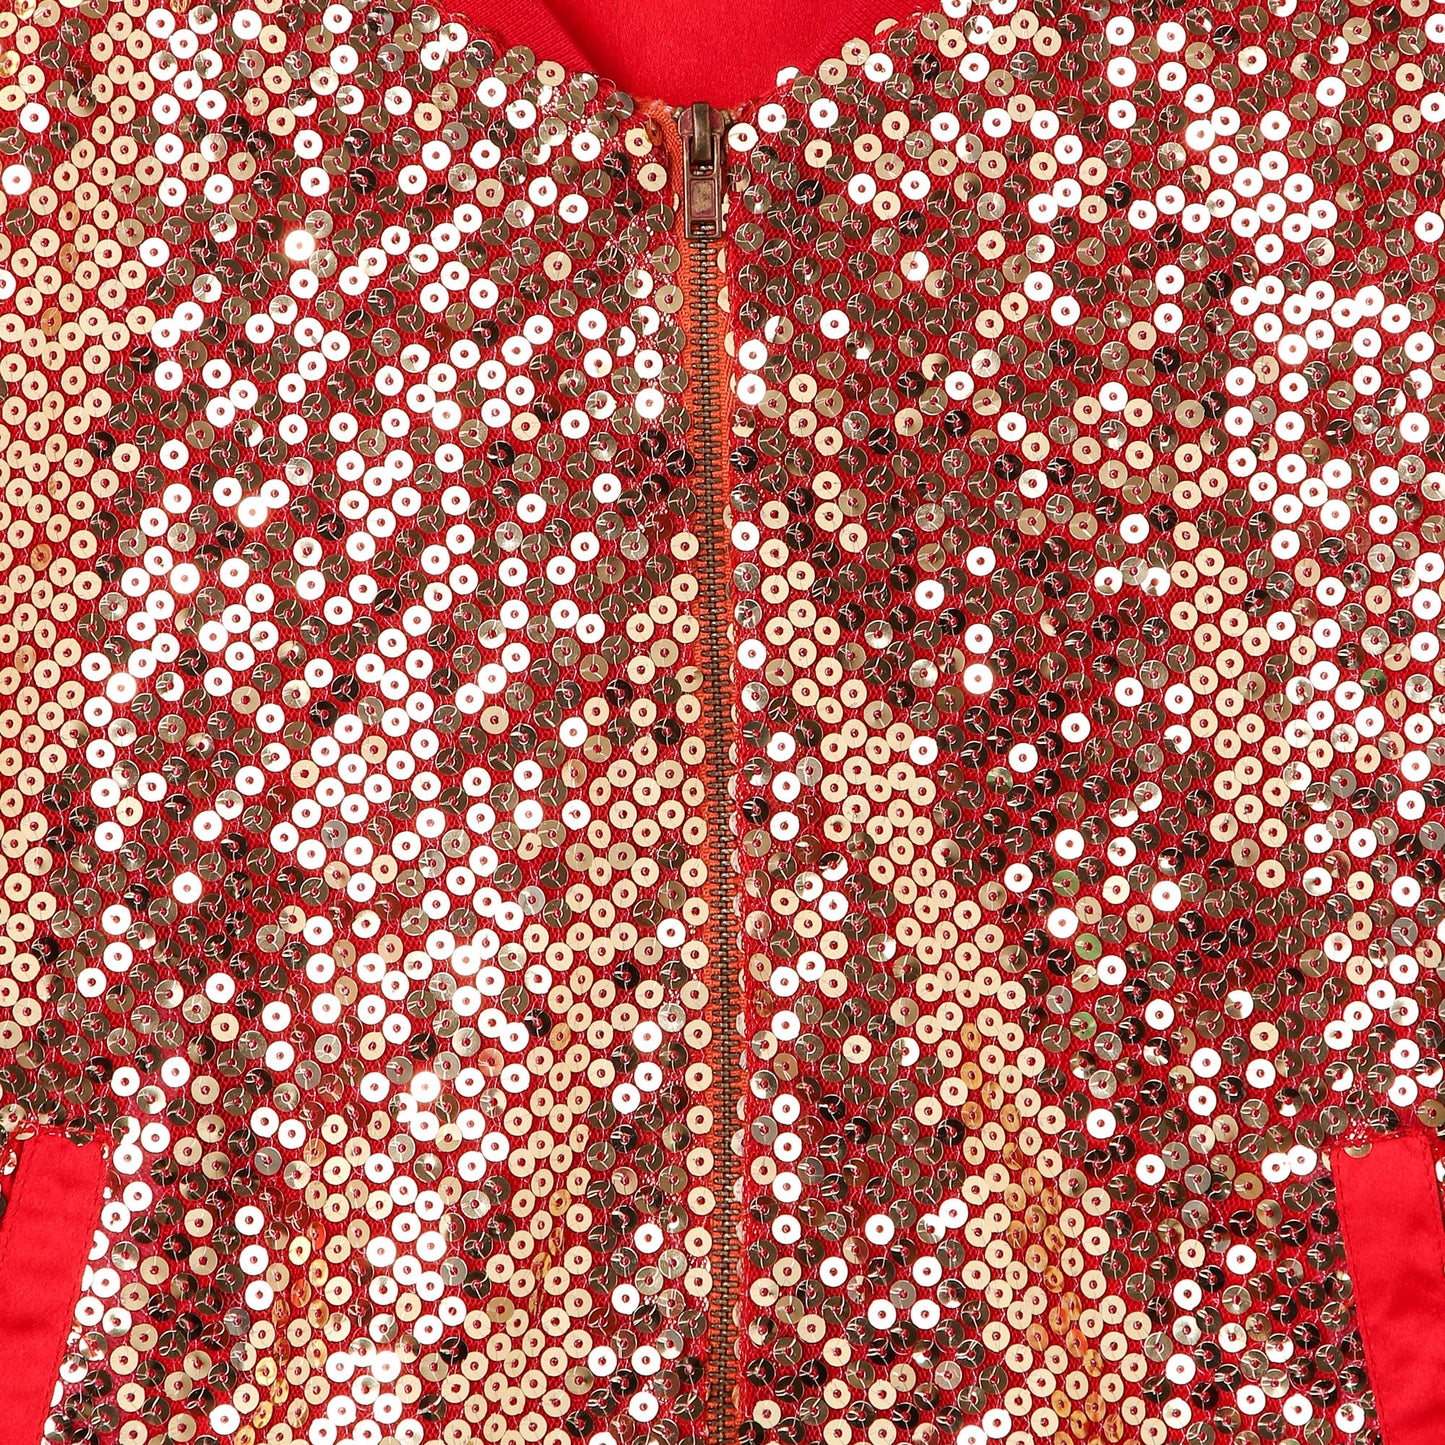 SHINY DISCO BALL RED CHRISTMAS AND NEW YEAR EVE JACKET